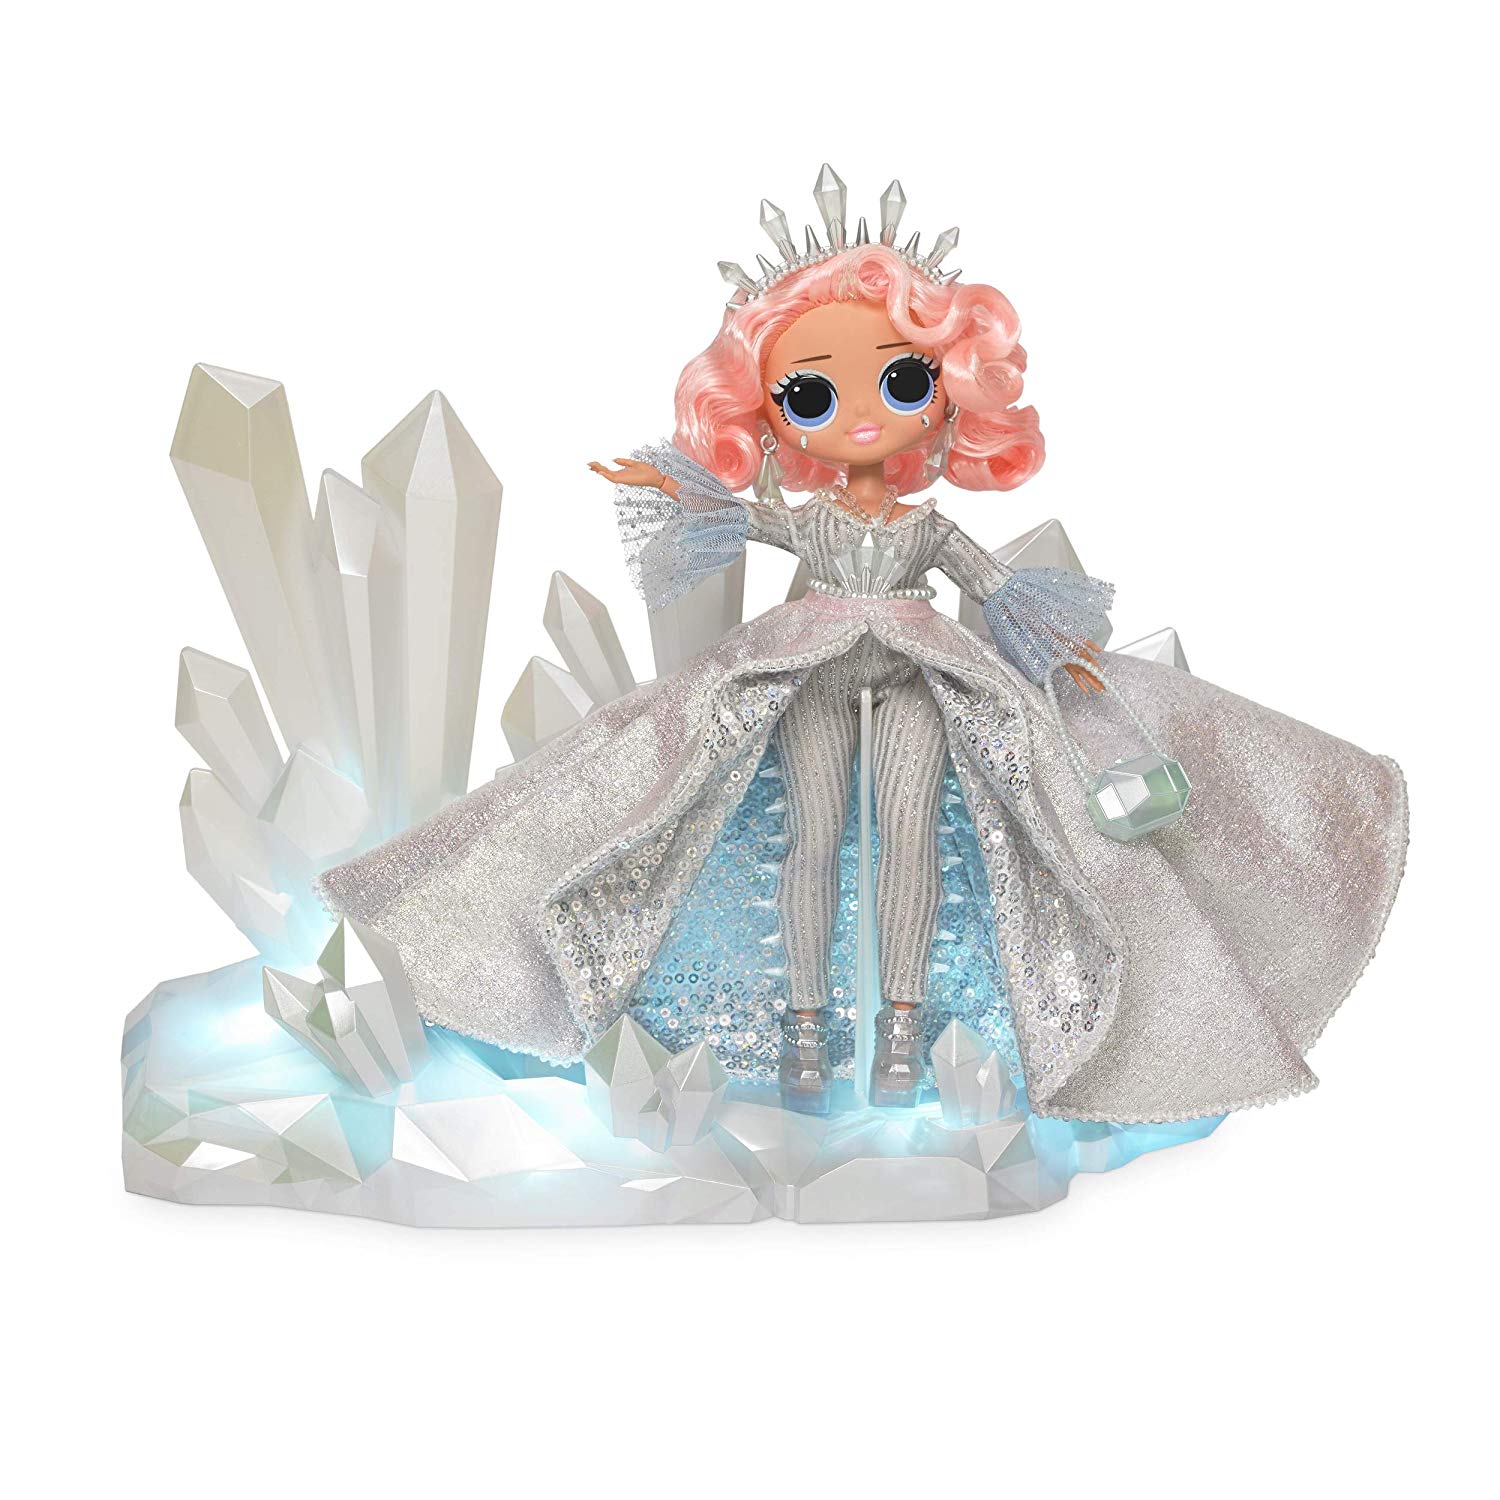 Lol Surprise Omg Crystal Star 2019 Collector Edition Fashion Doll Is